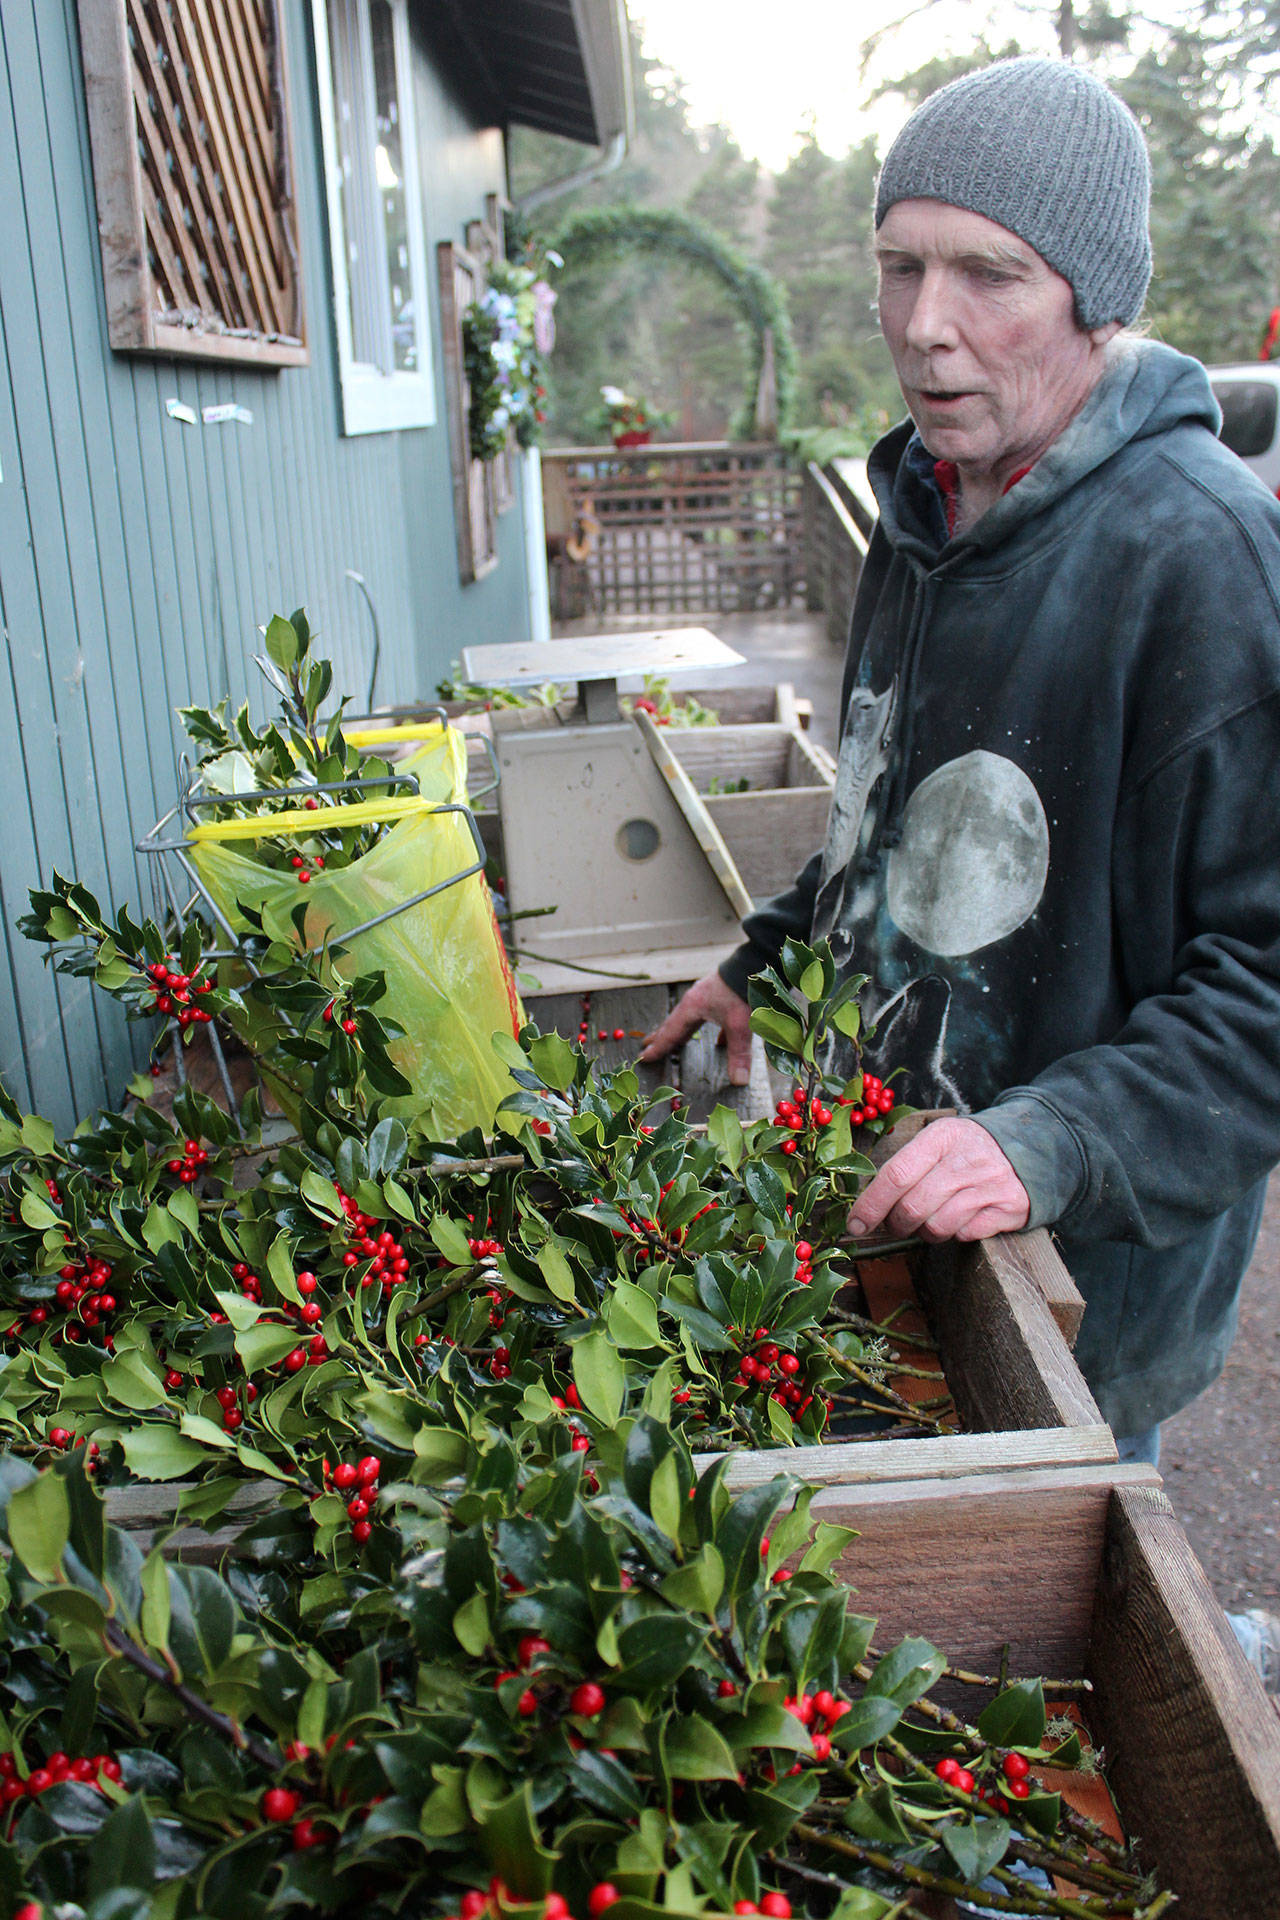 Henderson Holly Farm, north of Oak Harbor, has been making wreaths, swags, centerpieces since 1980. Owner Rob Henderson sorts through some holly stems that will be sold in bunches. Photos by Patricia Guthrie/Whidbey News-Times